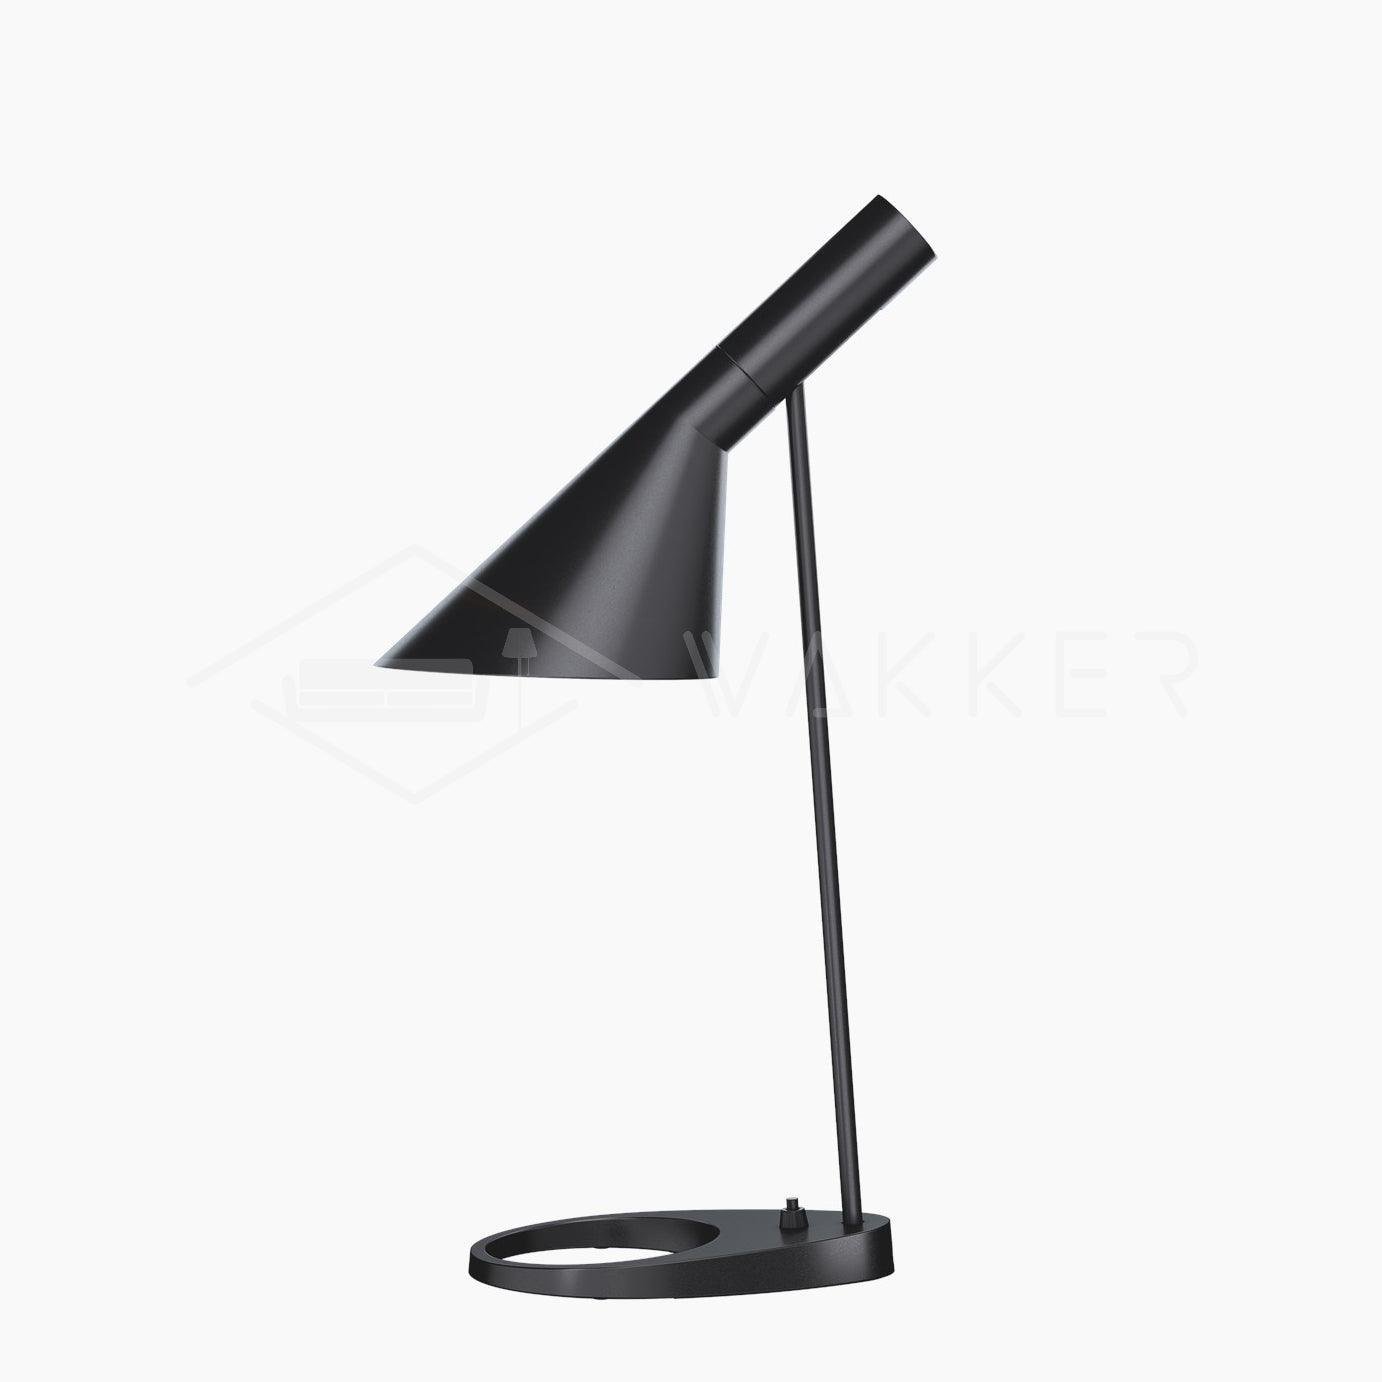 Black Danish Table Lamp with a diameter of 8.3″ and a height of 22″, equivalent to a diameter of 21cm and a height of 56cm, featuring a black exterior and equipped with a UK plug.